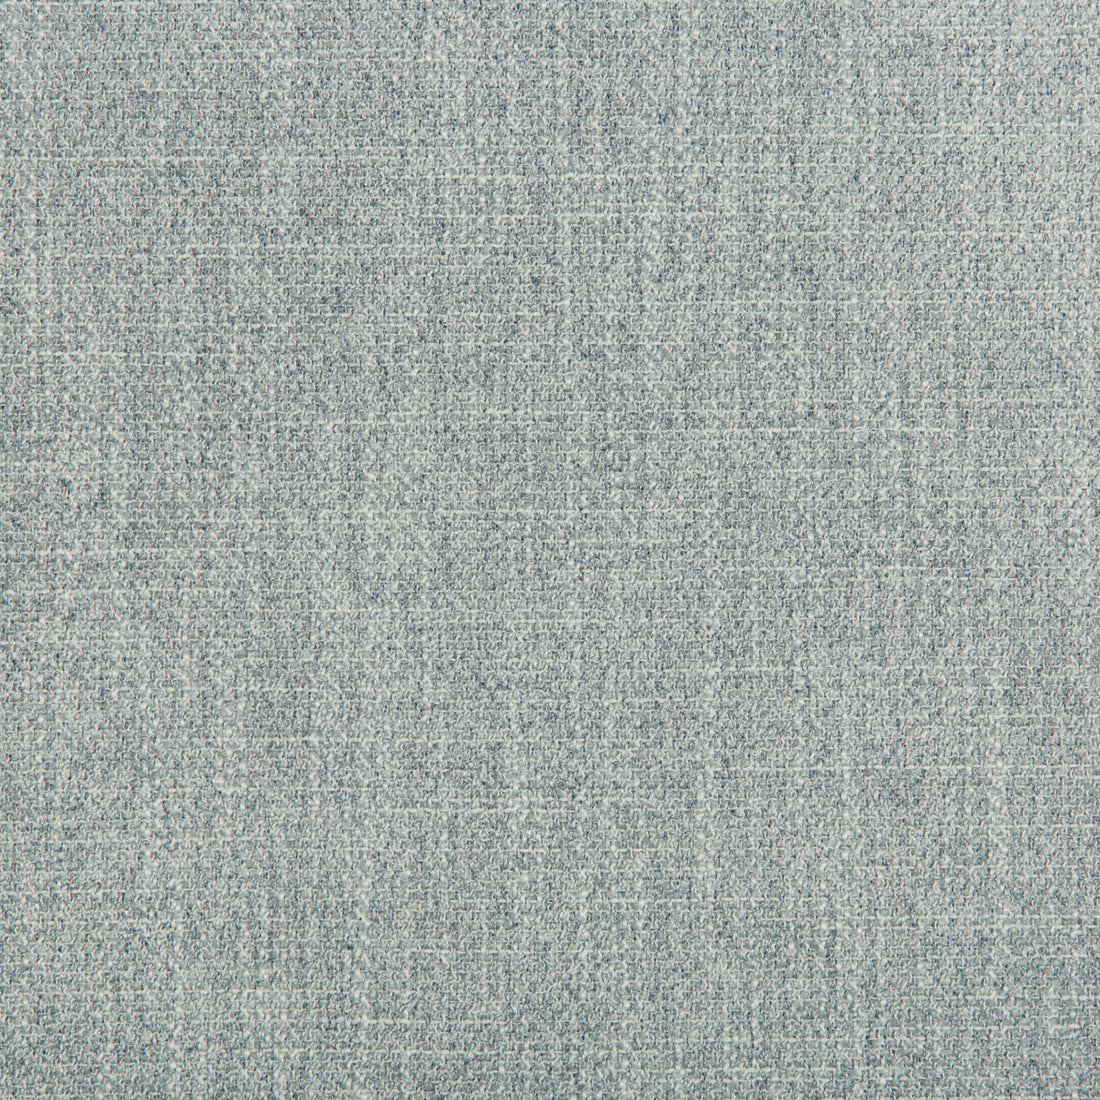 Kravet Contract fabric in 35404-15 color - pattern 35404.15.0 - by Kravet Contract in the Crypton Incase collection